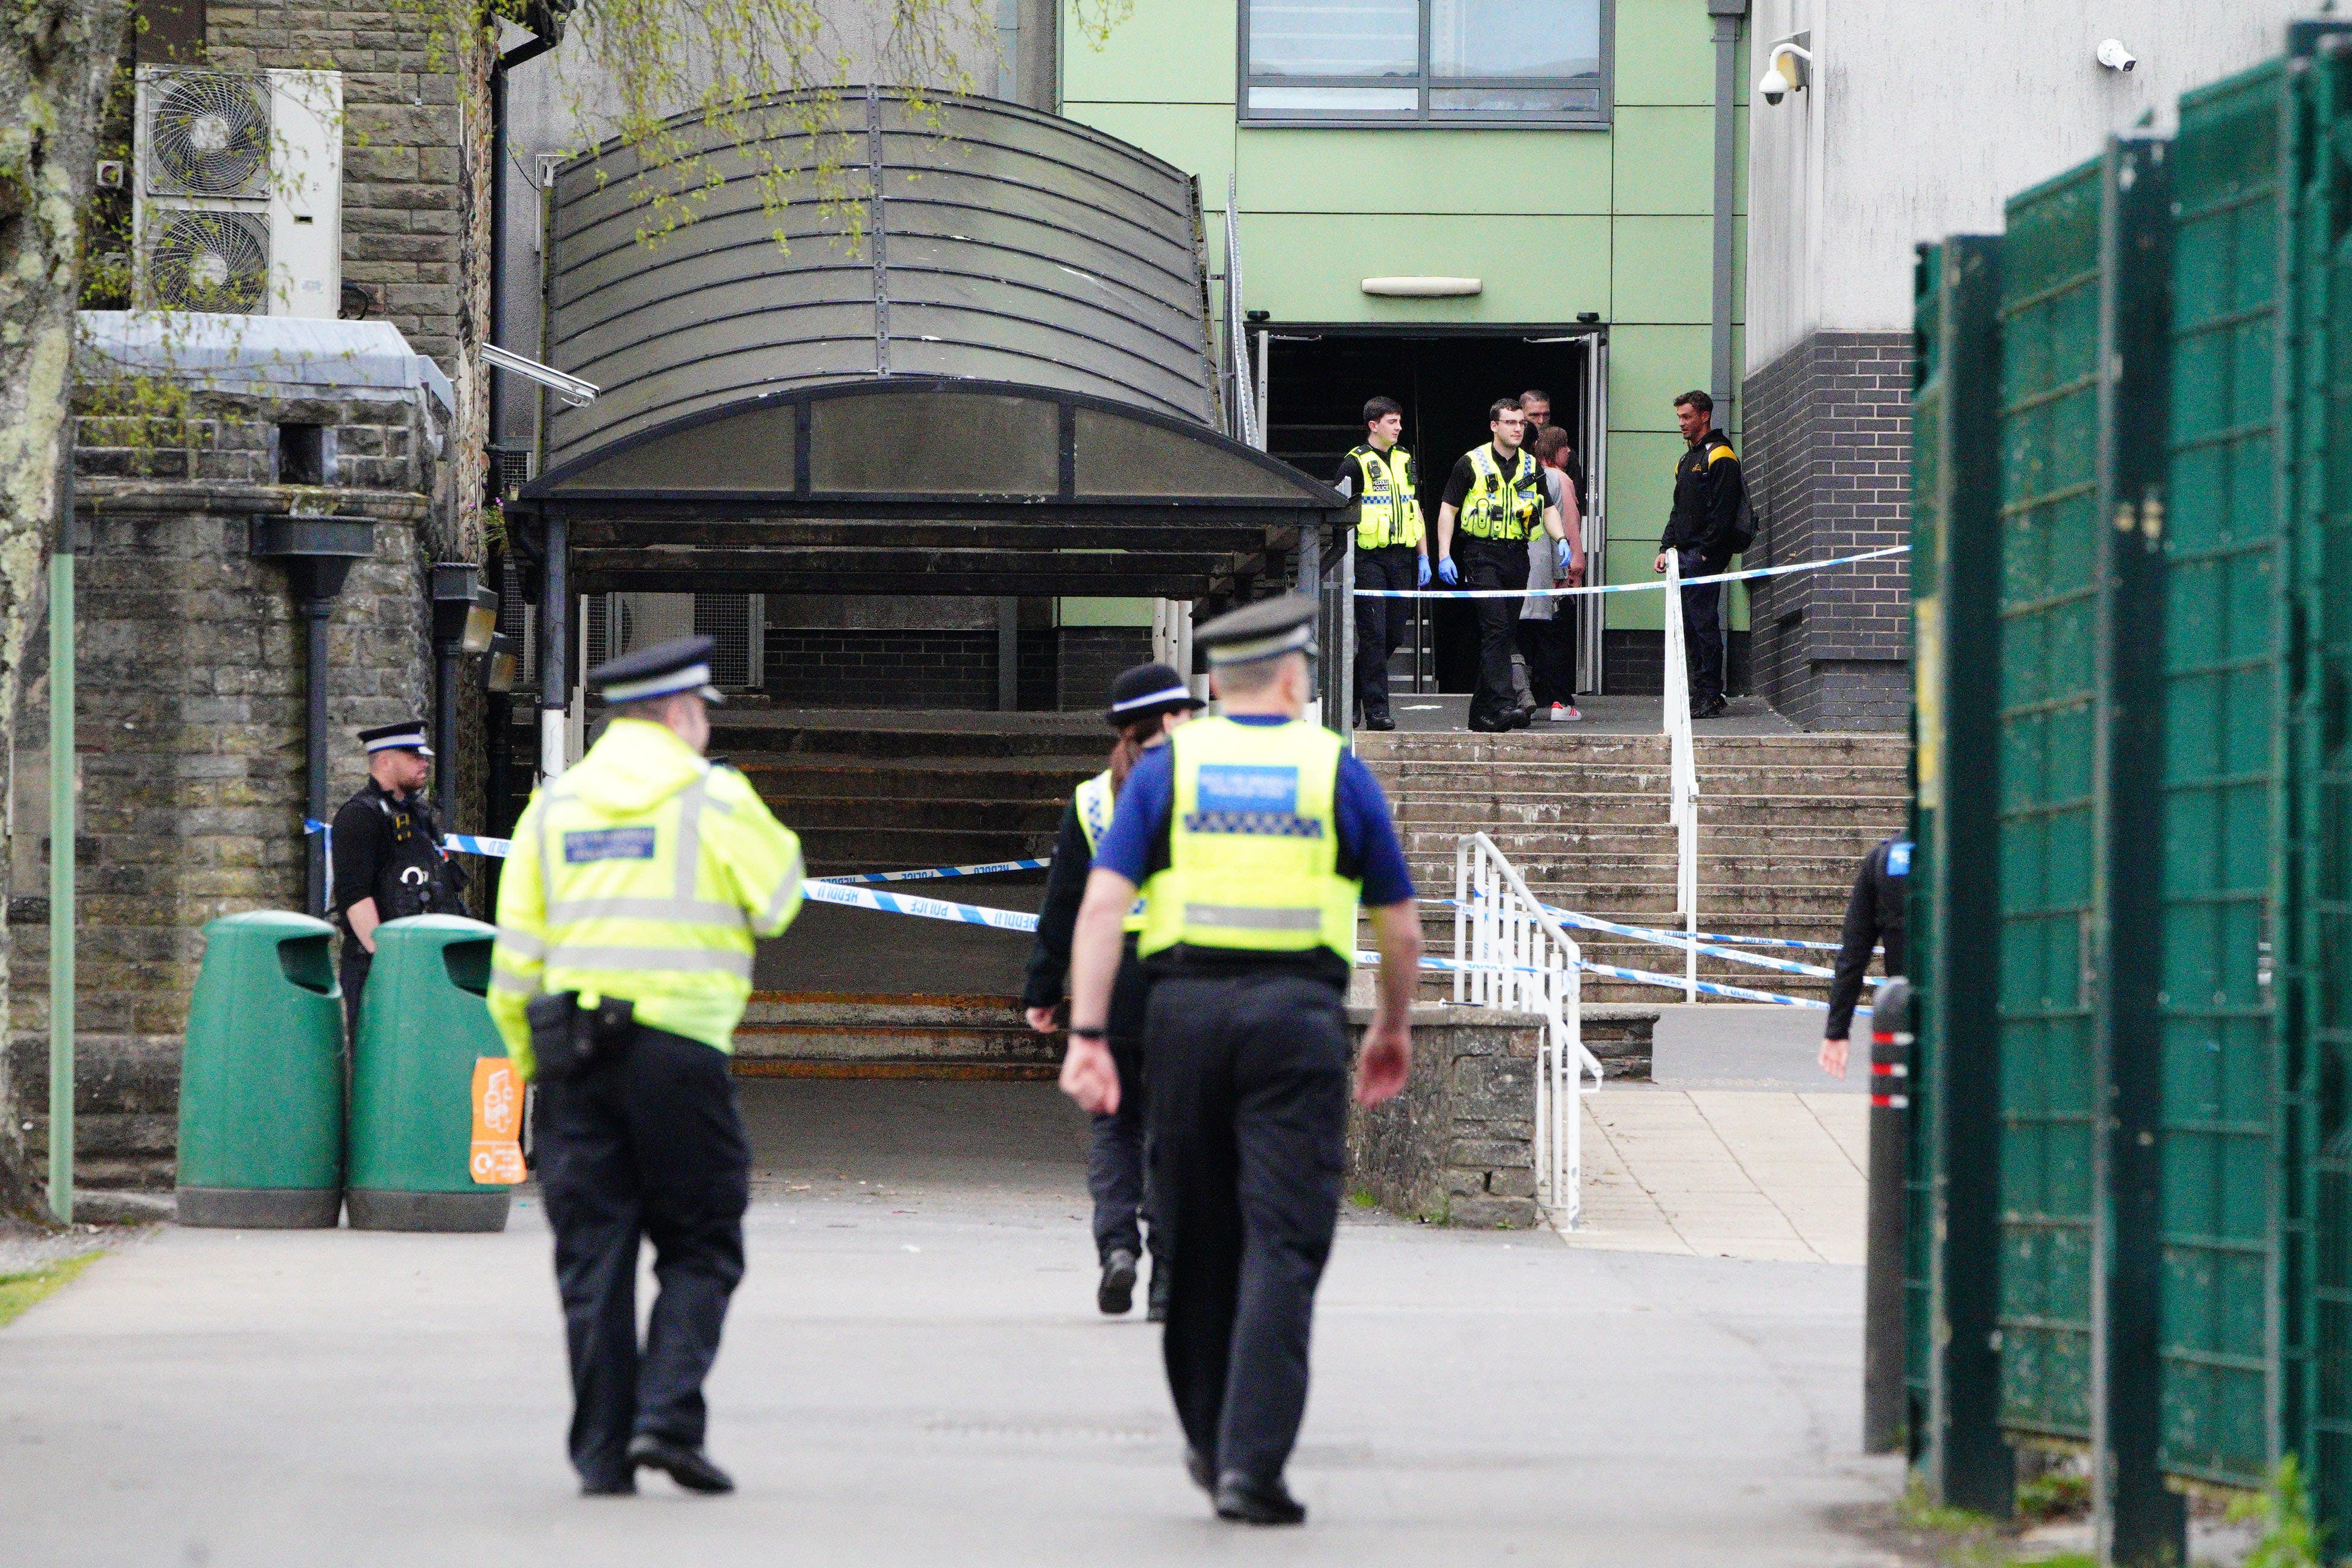 Amman Valley School was put on lockdown as police investigated on Wednesday